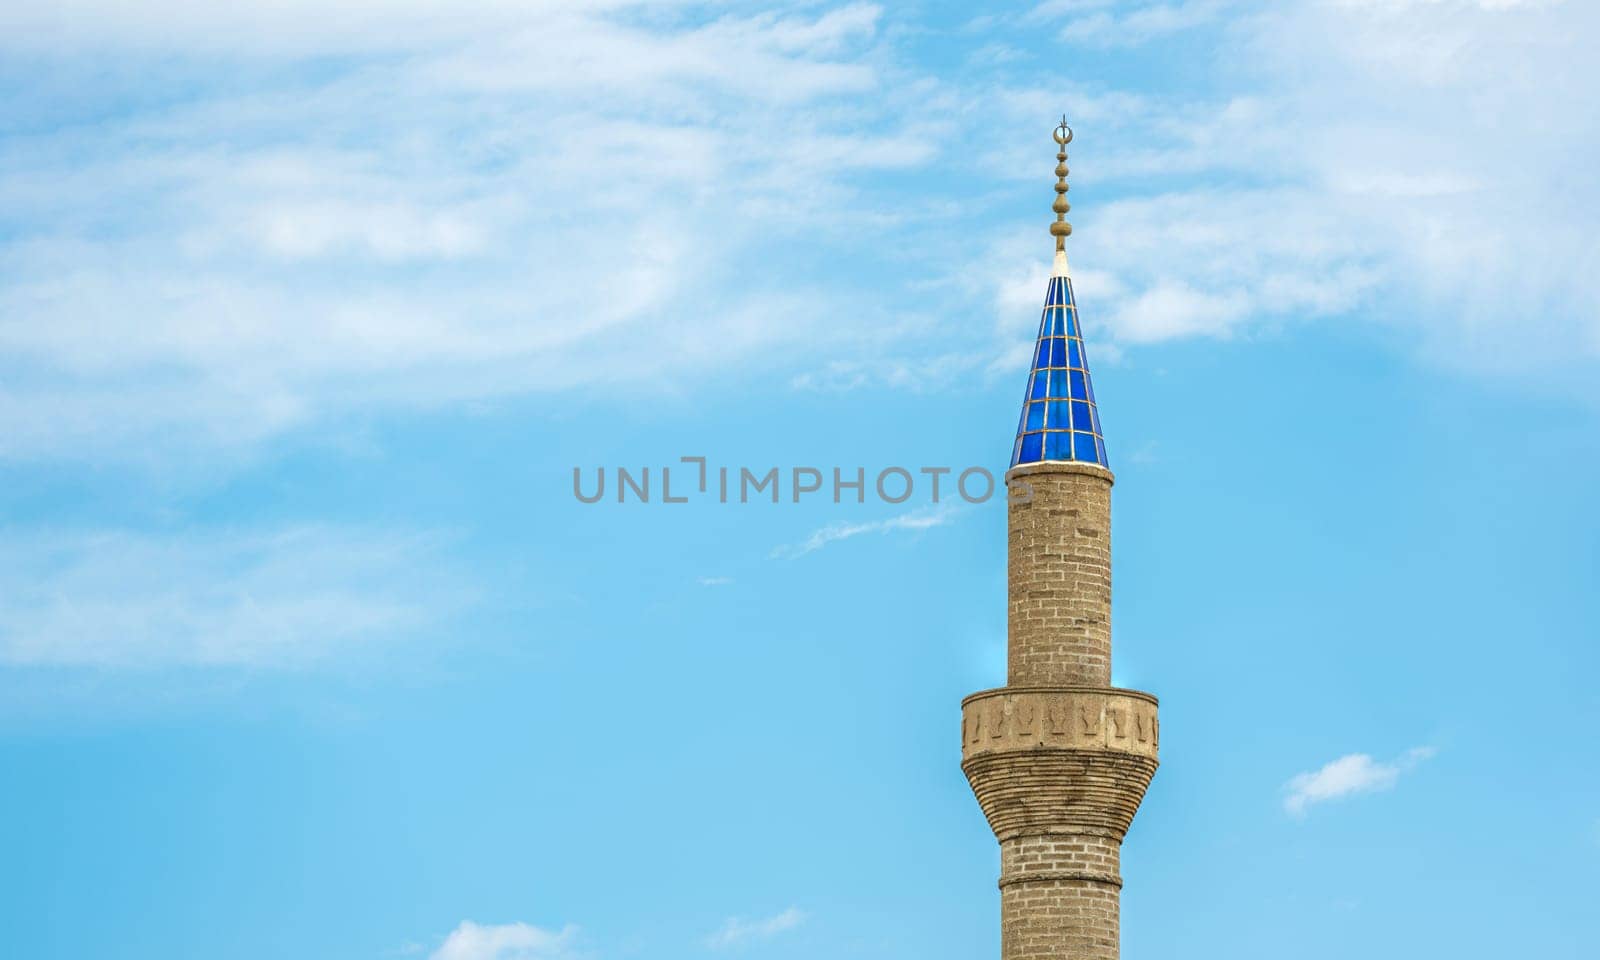 Mosque minaret with blue glass in front of a sunny, cloudless blue sky by Sonat